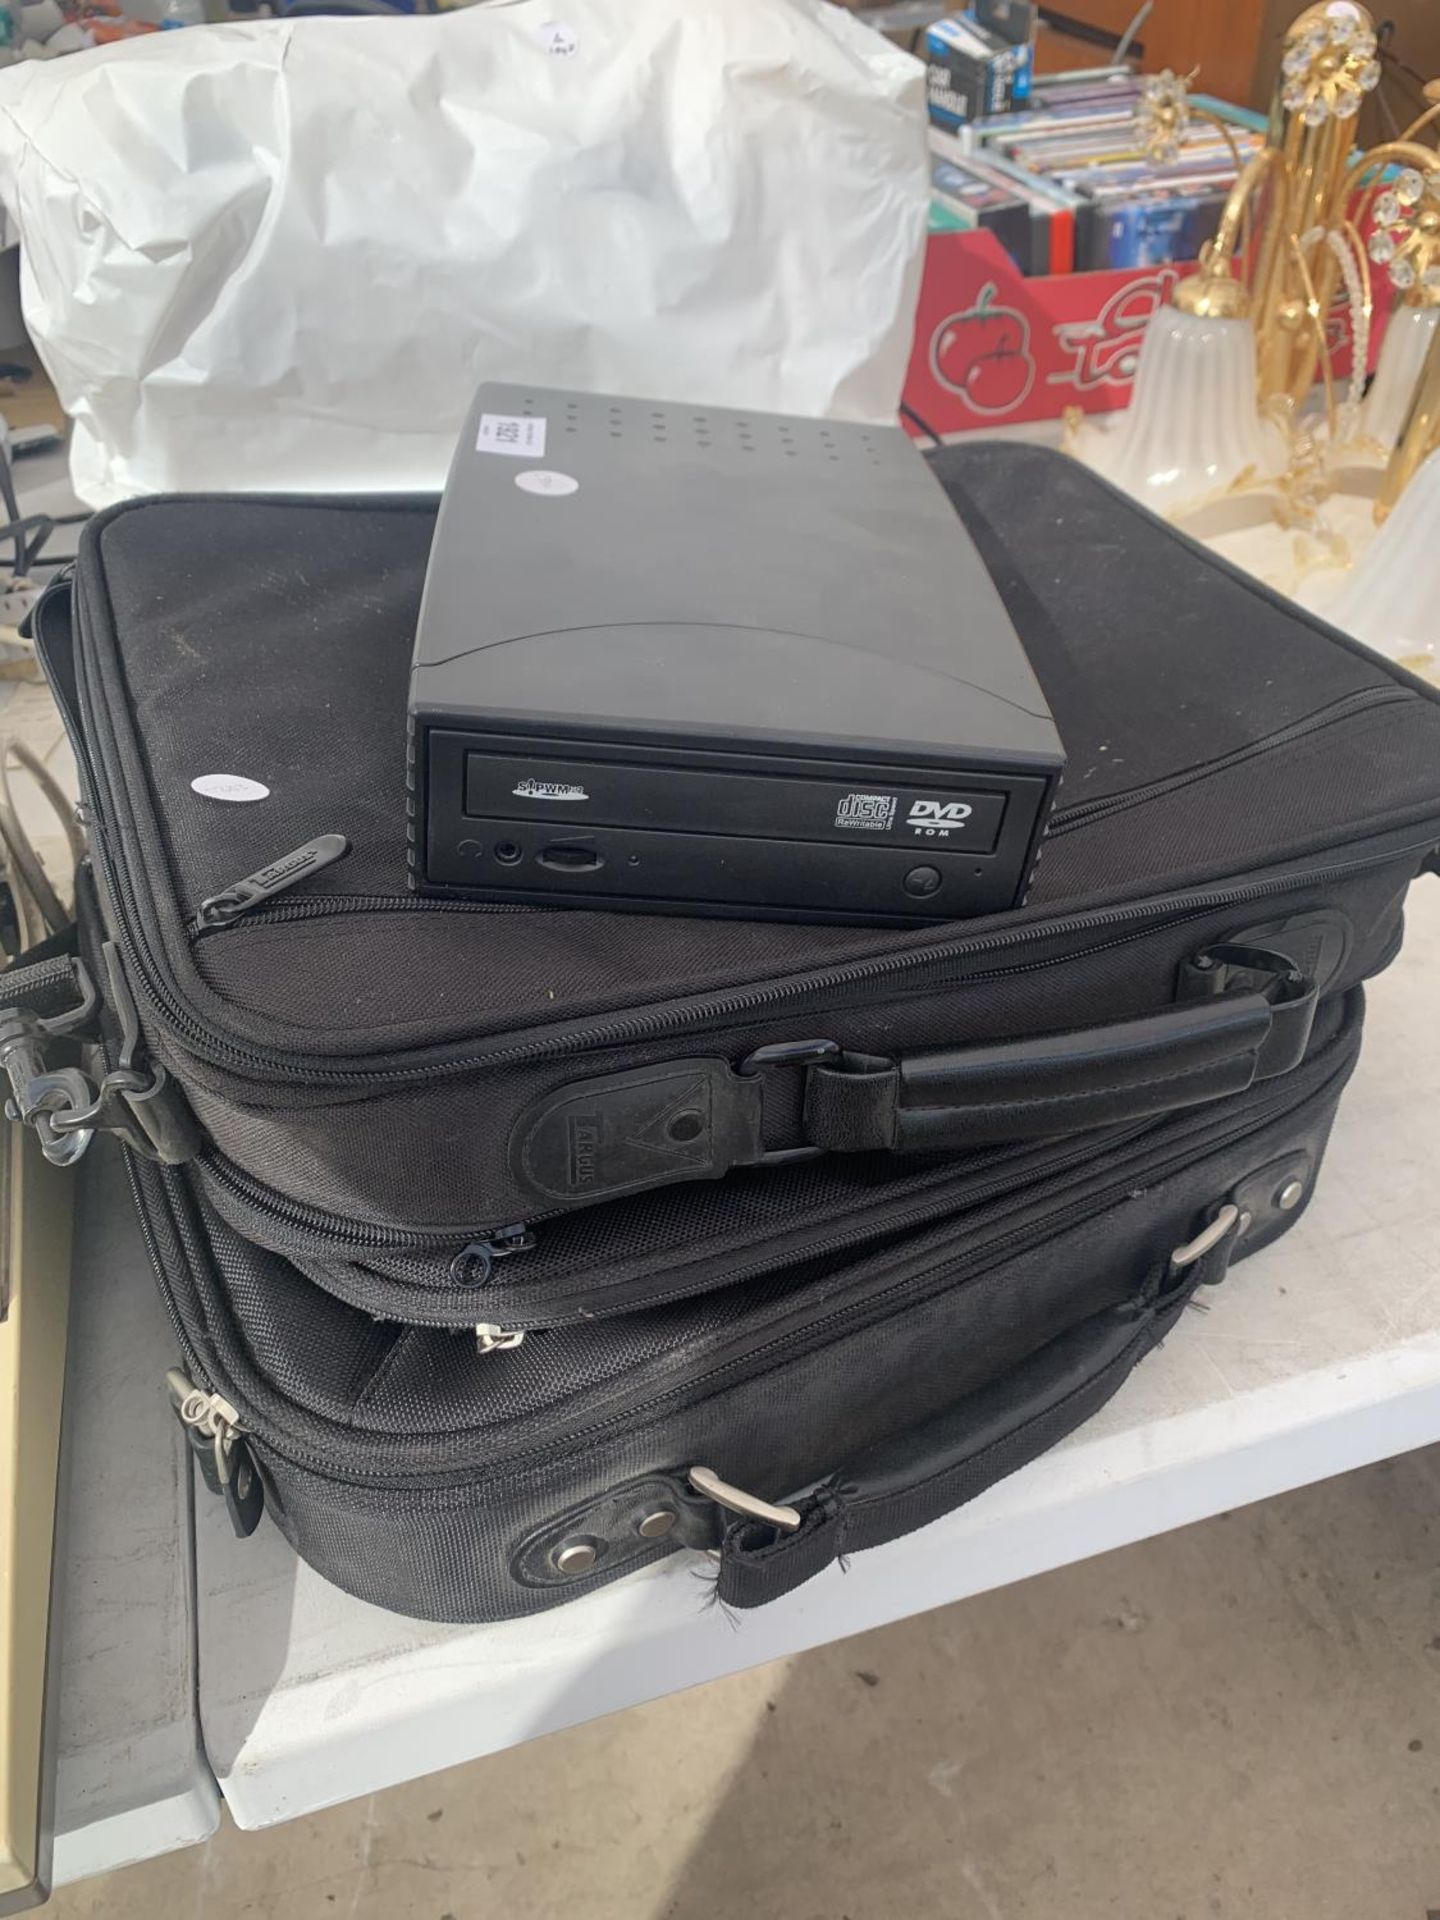 A CANON AP100, A SMITH CORONA XD4800, TWO LAPTOP BAGS AND A DVD ROM - Image 2 of 5